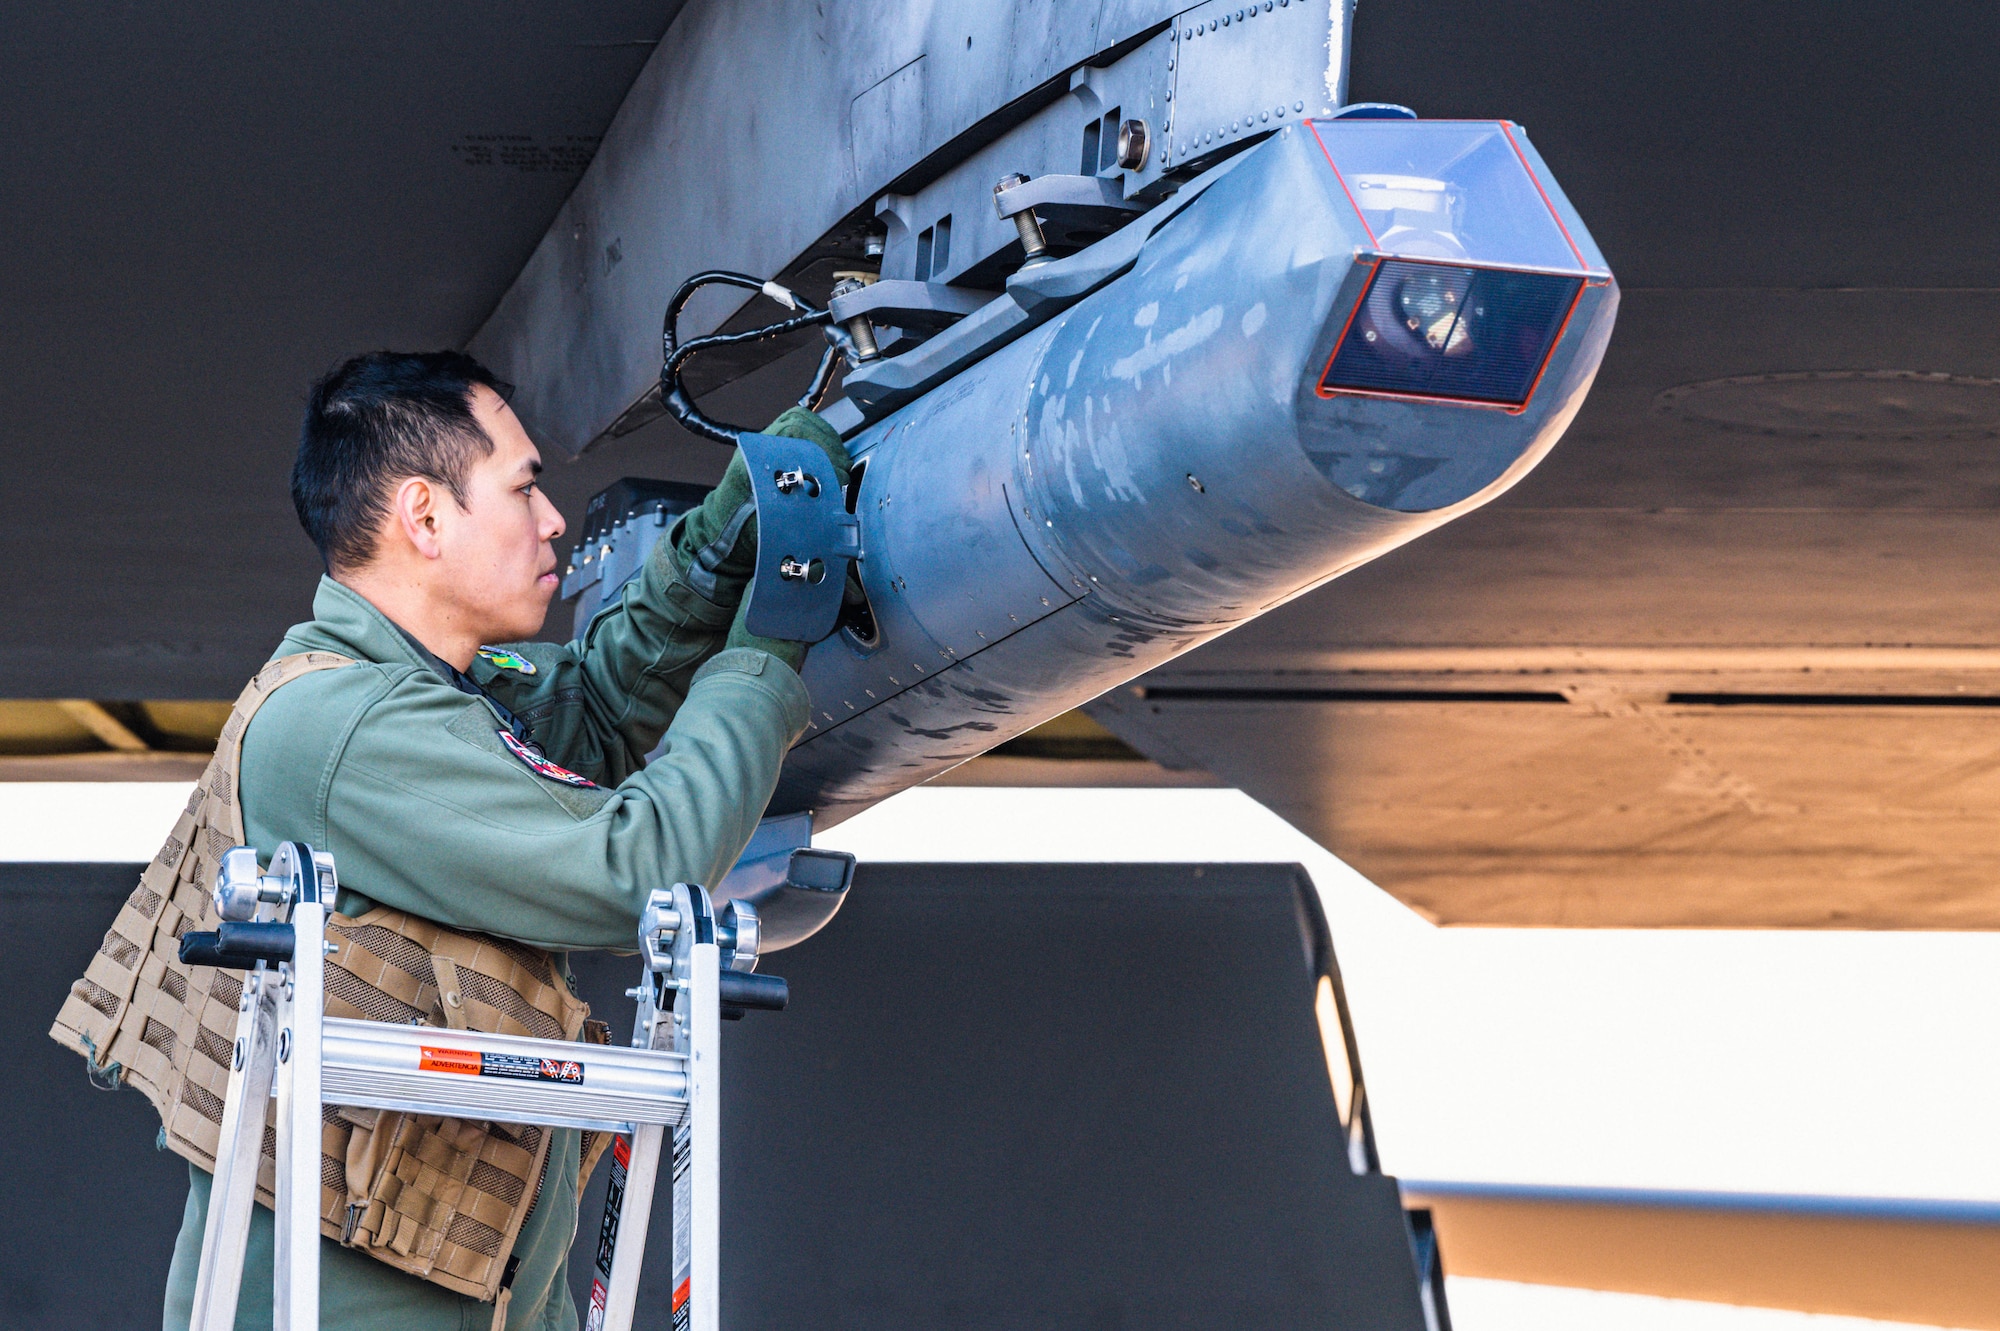 Capt. Angelico Palparan, weapon system officer assigned to the 23rd Expeditionary Bomb Squadron, inspects a B-52H Stratofortress targeting pod before takeoff at Morón Air Base, Spain, Mar. 1, 2023. Strategic bomber missions enhance the readiness and training necessary to respond to any potential crisis or challenge across the globe. (U.S. Air Force photo by Airman 1st Class Alexander Nottingham)